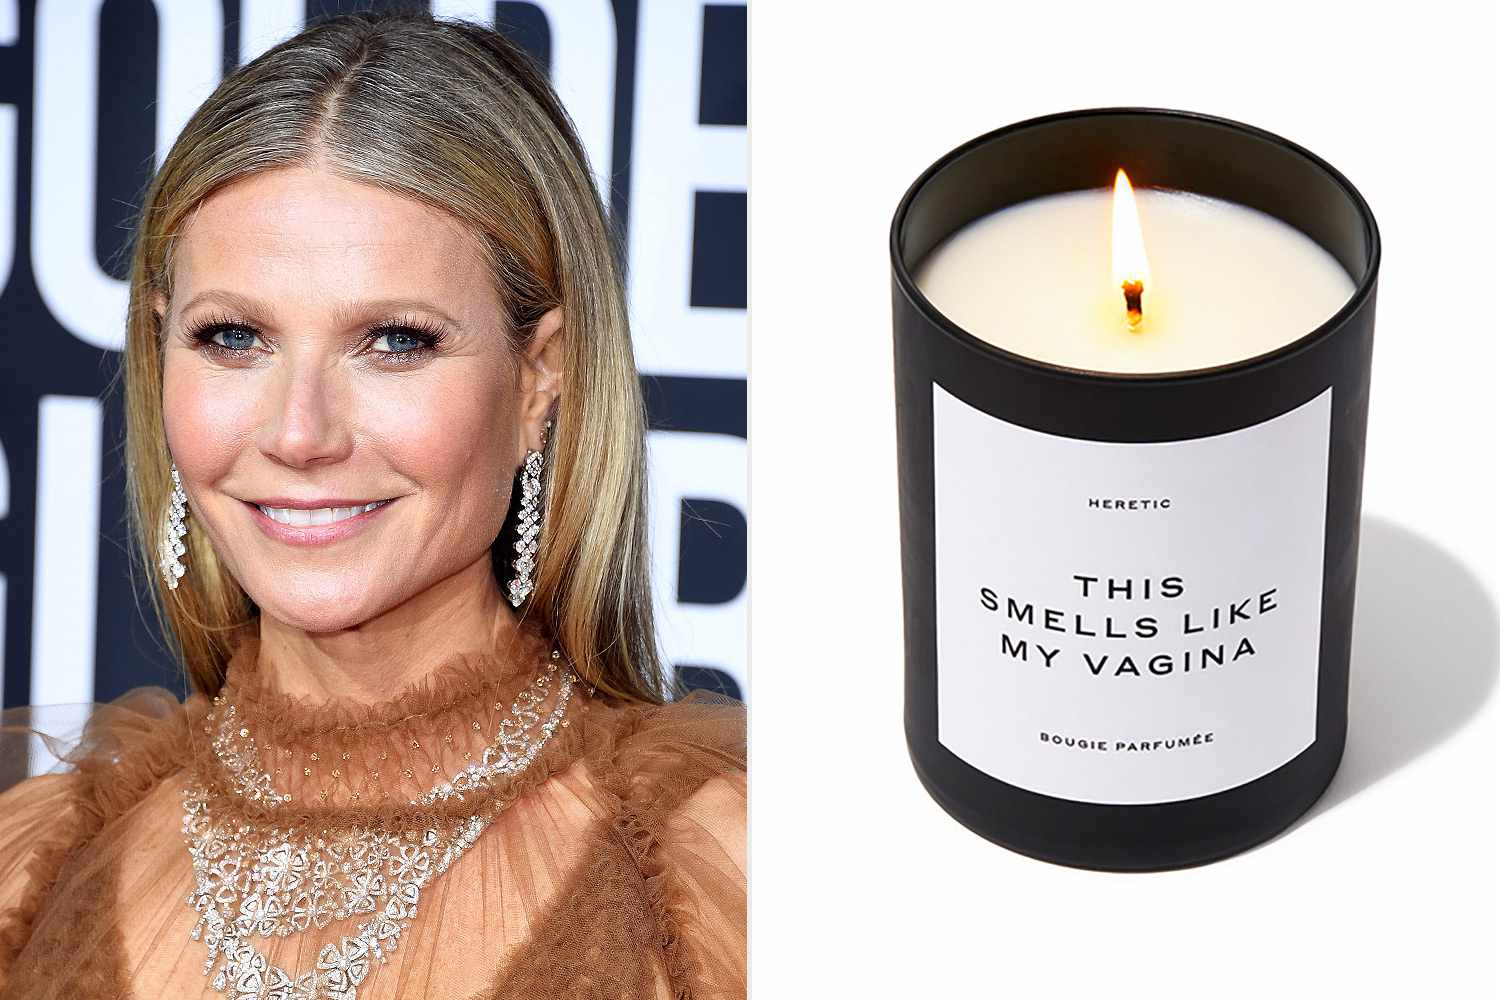 Gwyneth Paltrow Explains the Origin of Her Now-Viral Vagina-Scented Candle  | PEOPLE.com